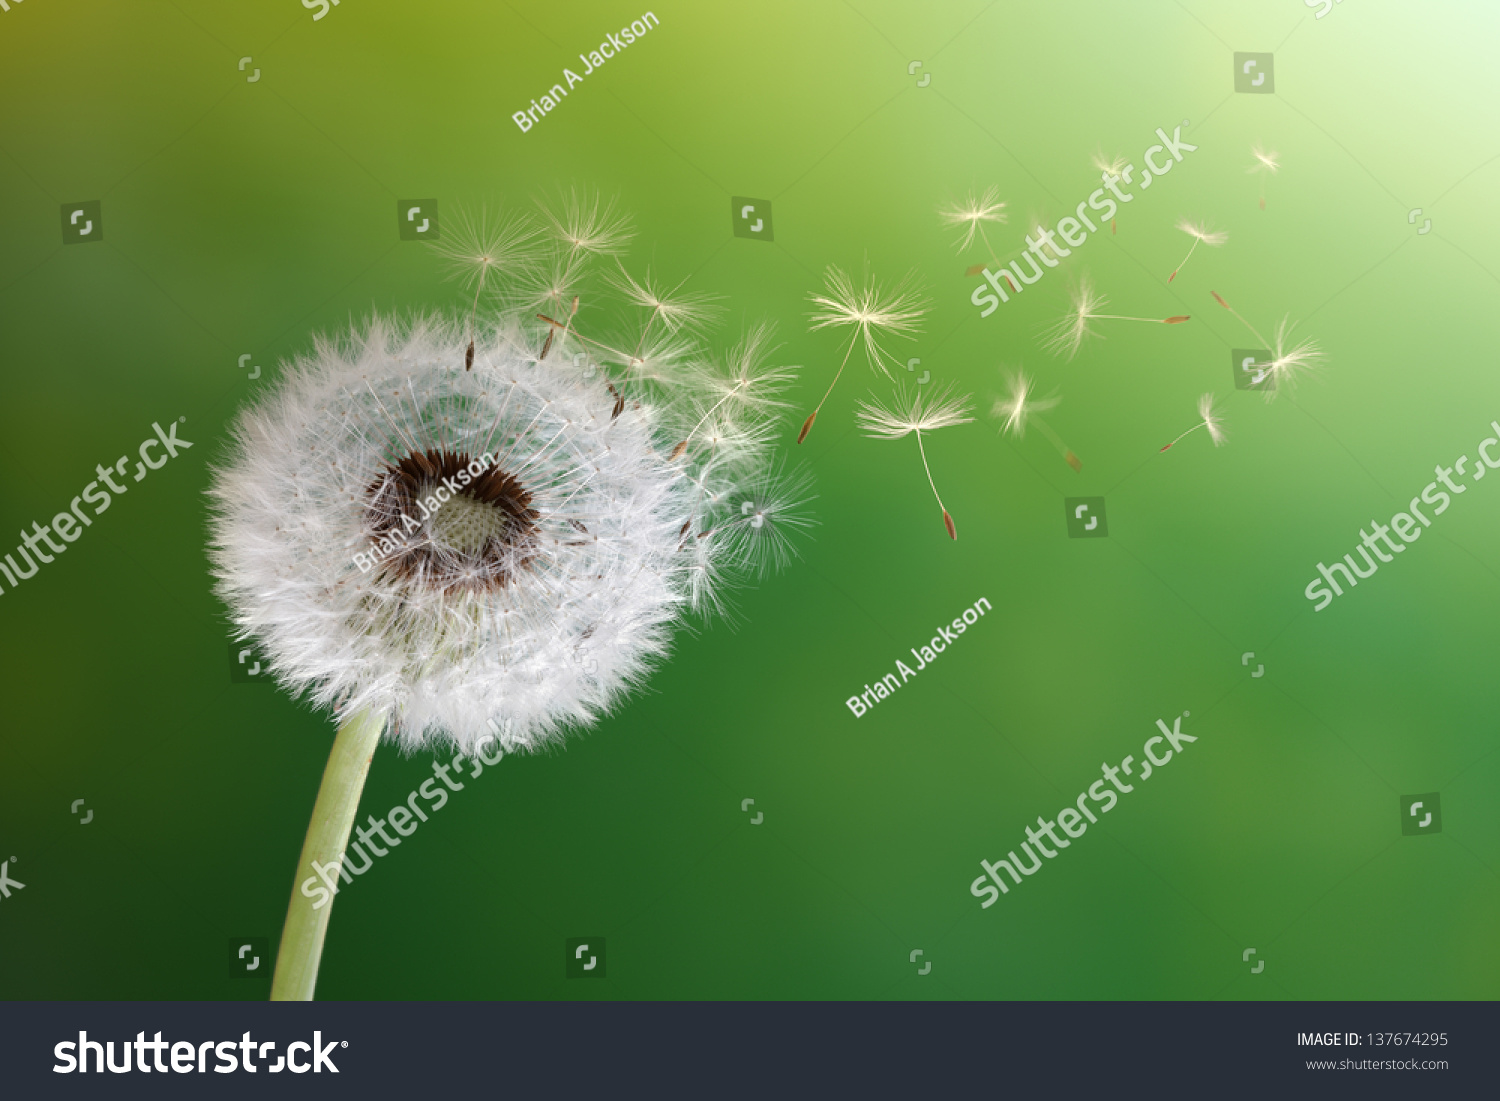 Dandelion seeds in the morning sunlight blowing away across a fresh green background #137674295